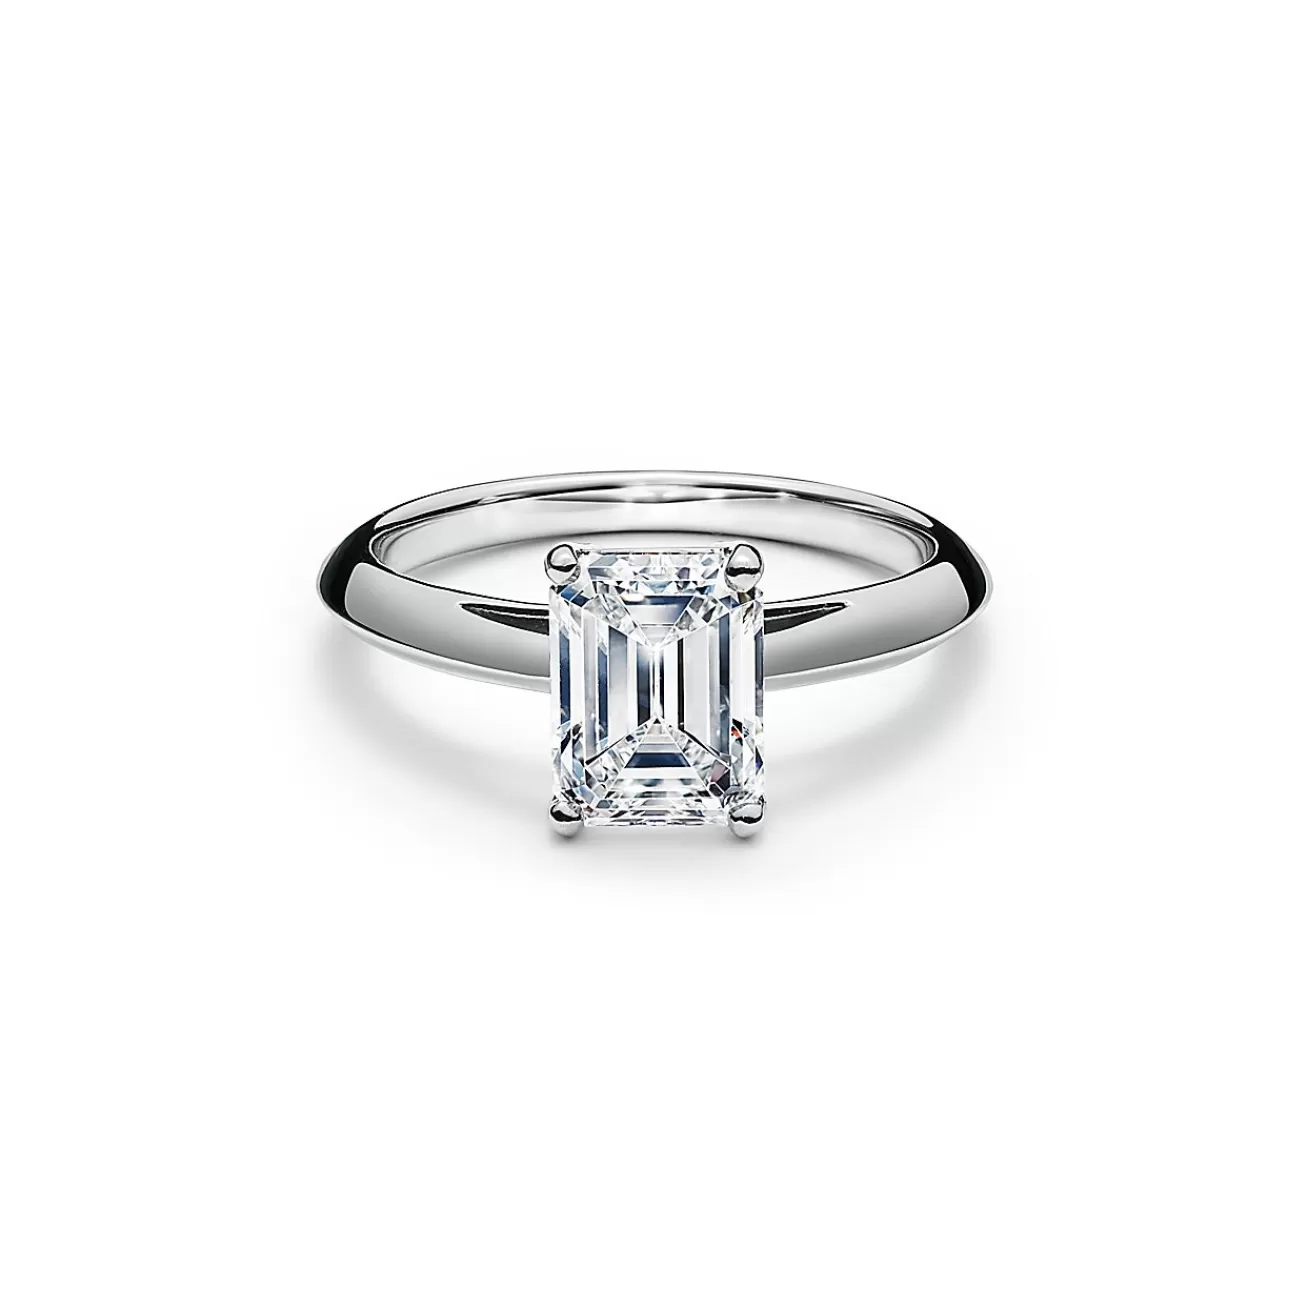 Tiffany & Co. Emerald-cut diamond engagement ring in platinum. | ^ Engagement Rings